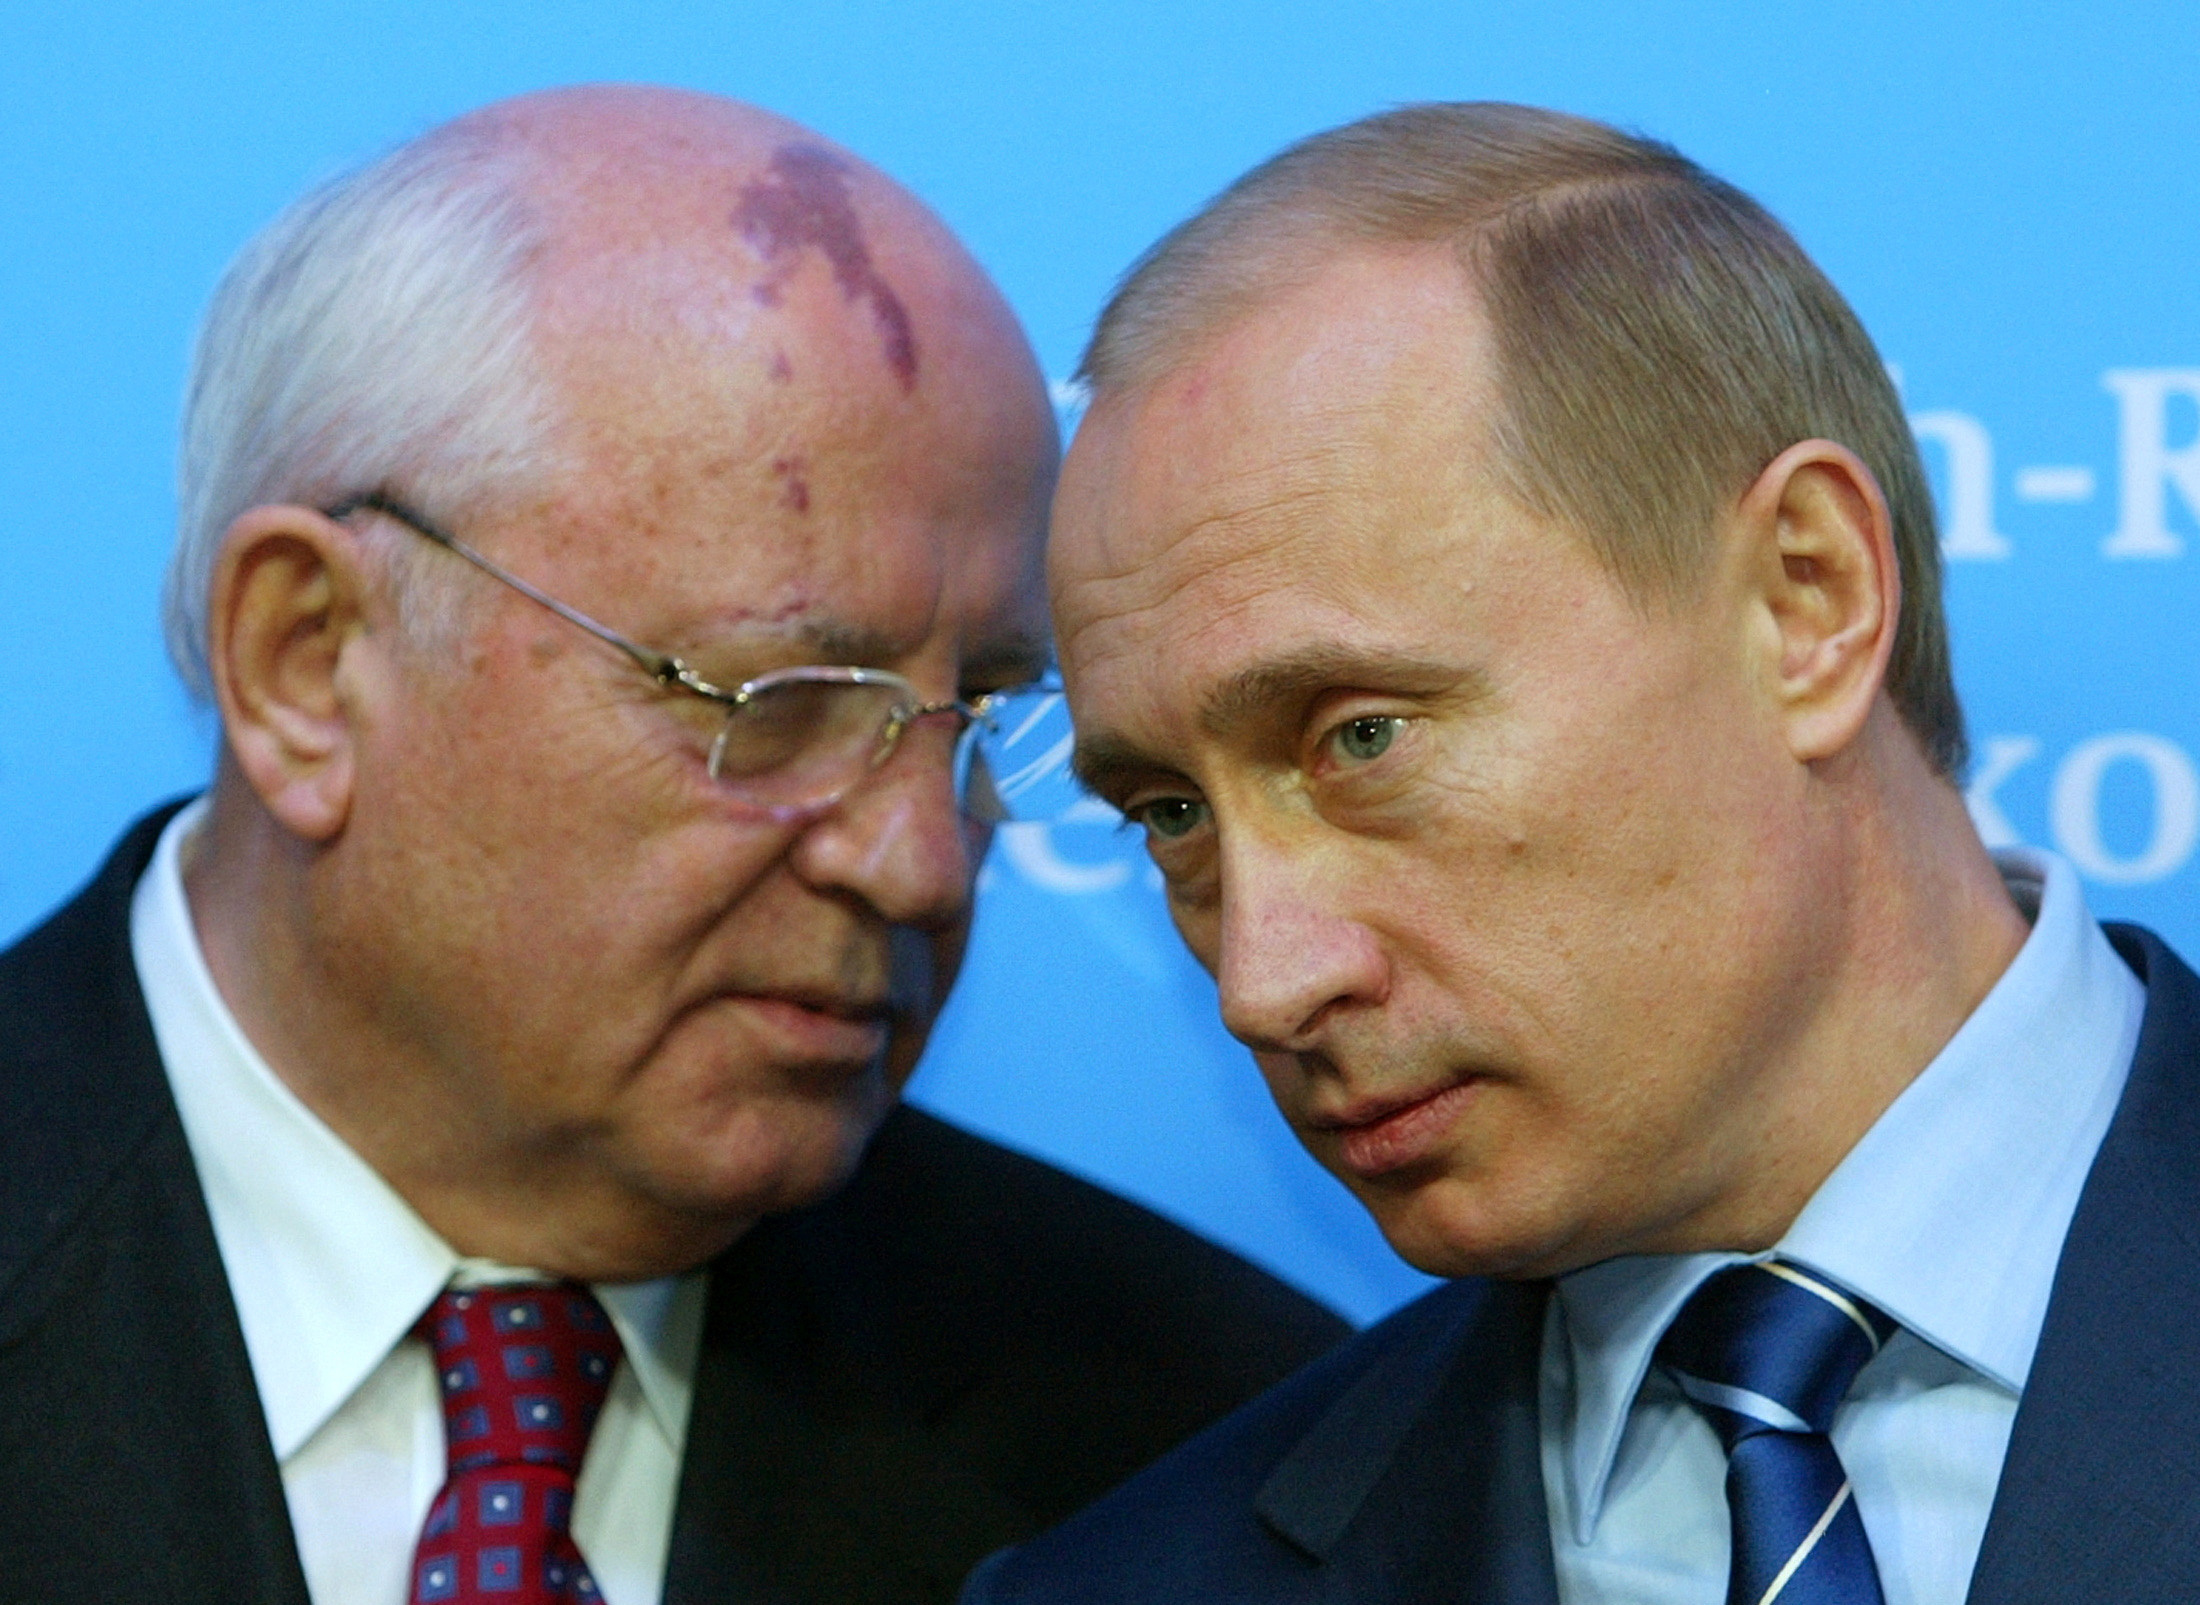 Russian President Putin listens to former President of the Soviet Union Gorbachev during news conference in Schleswig